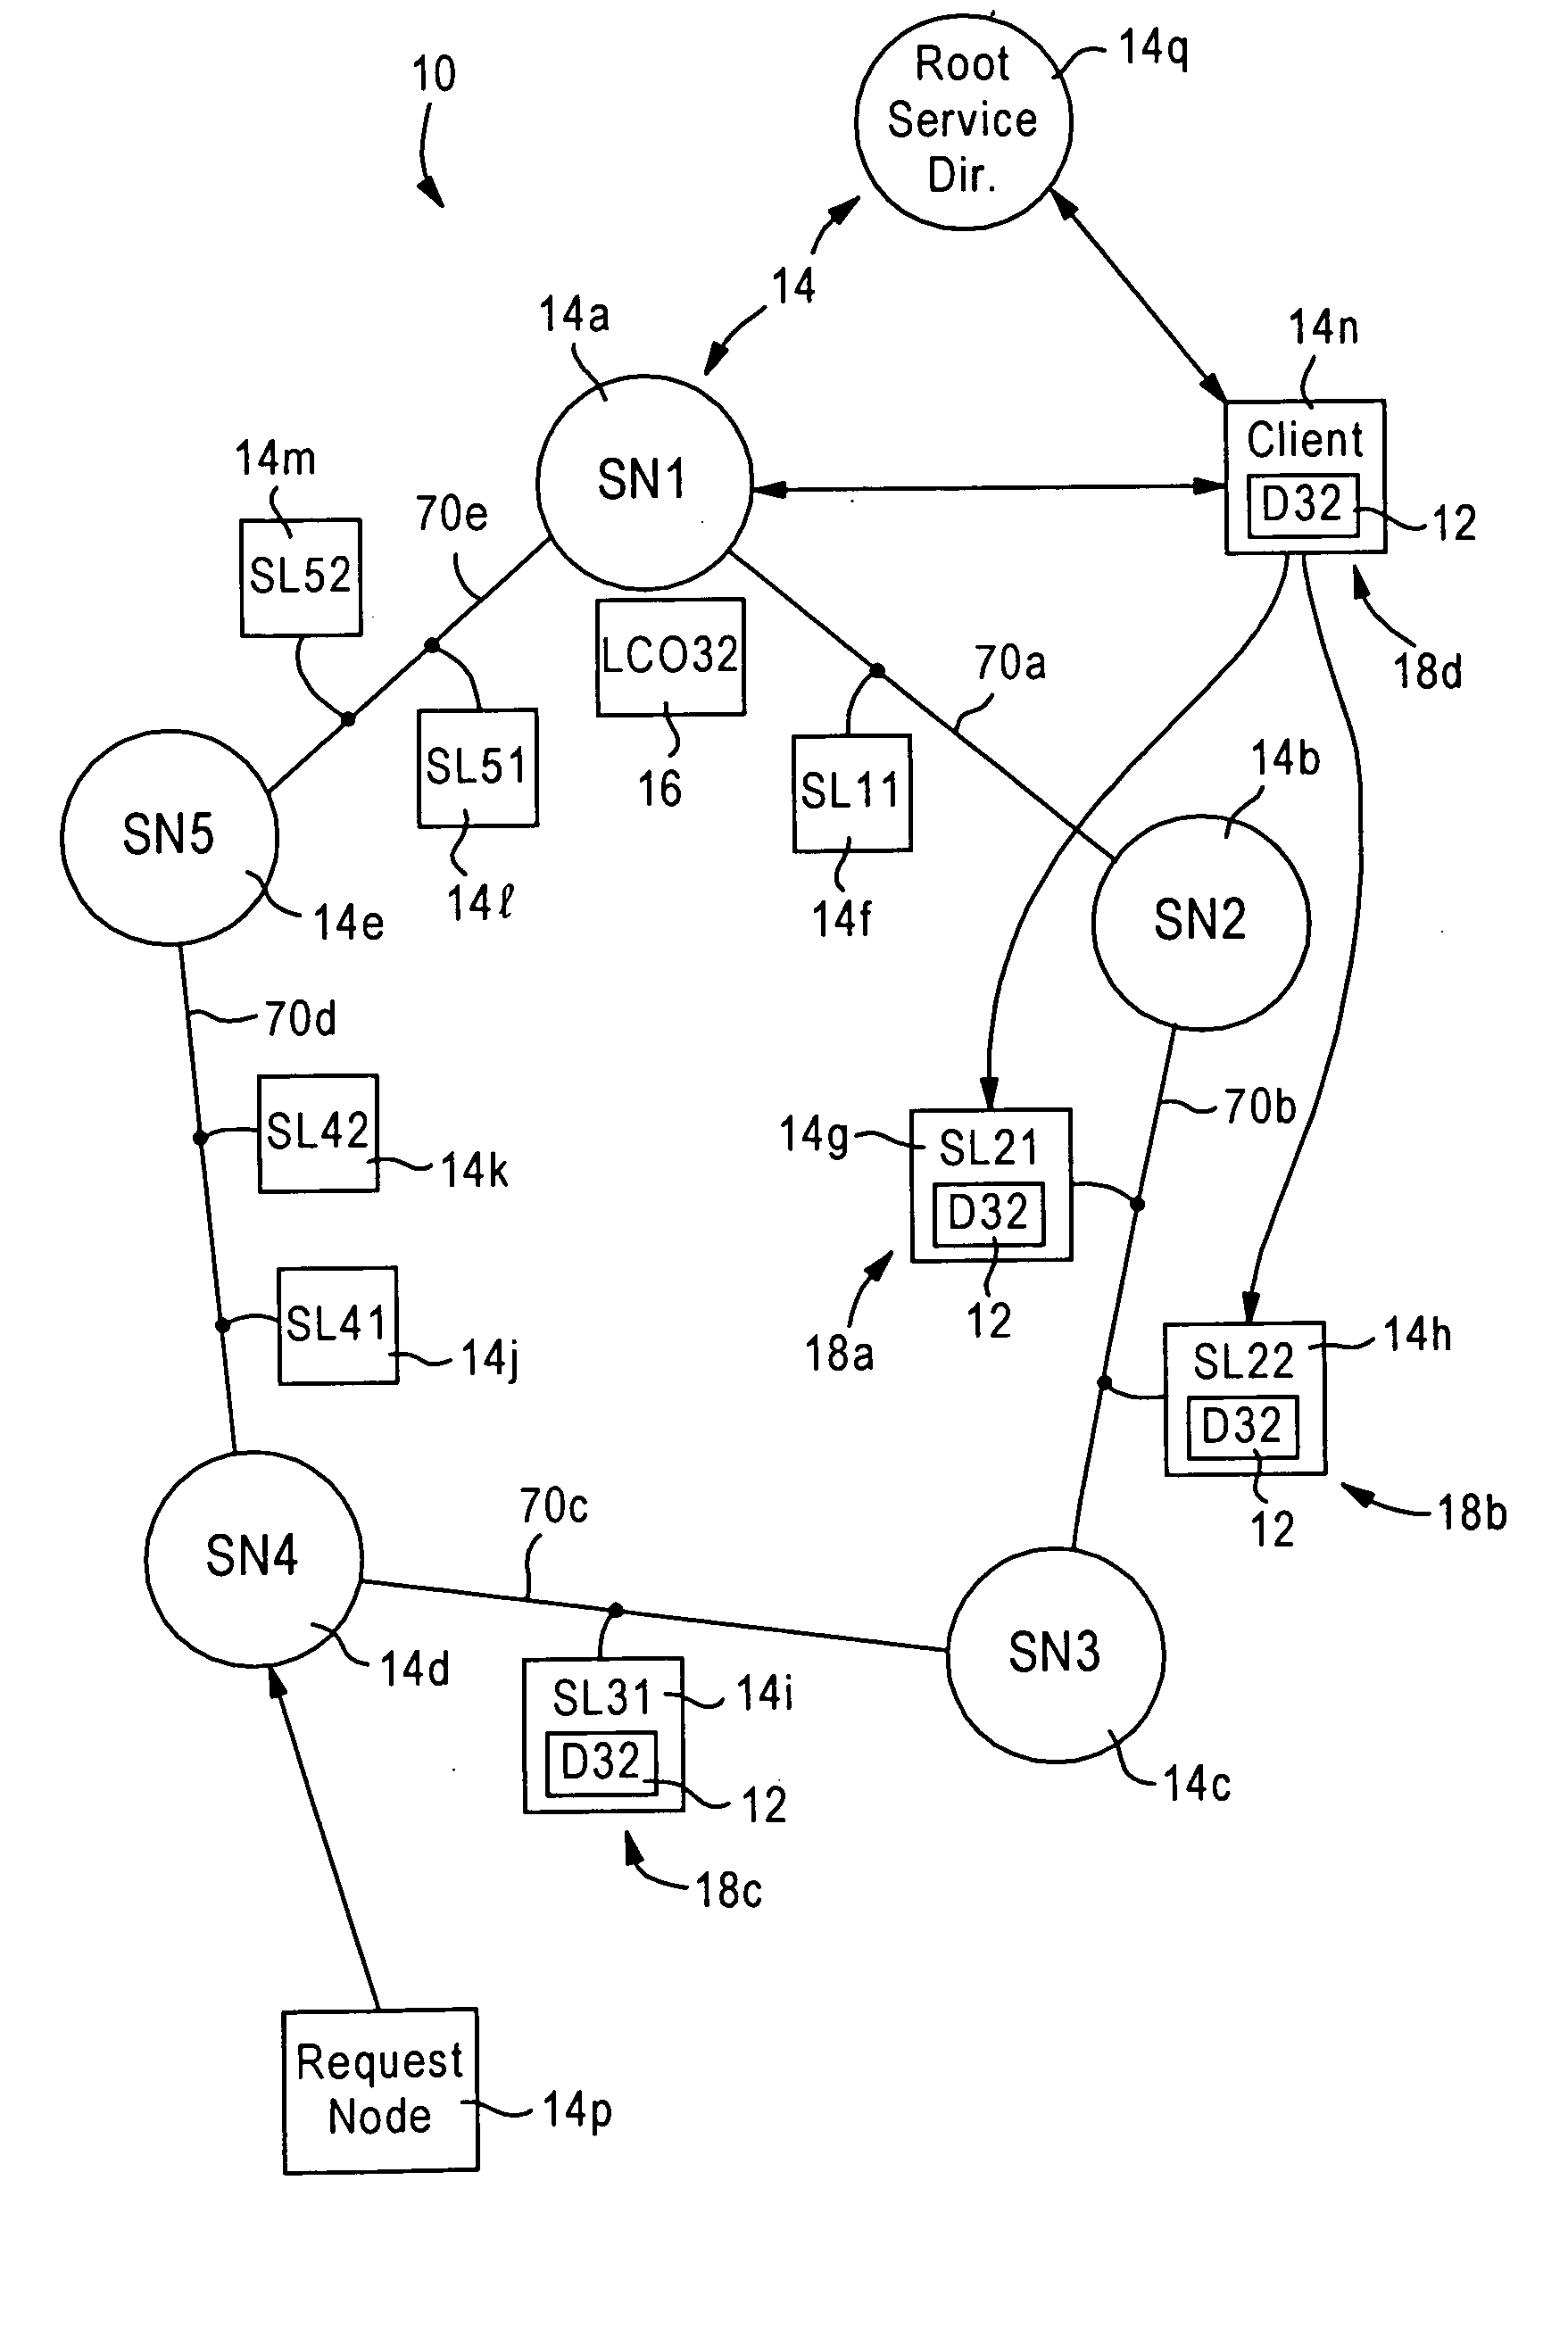 Arrangement in a network for passing control of distributed data between network nodes for optimized client access based on locality